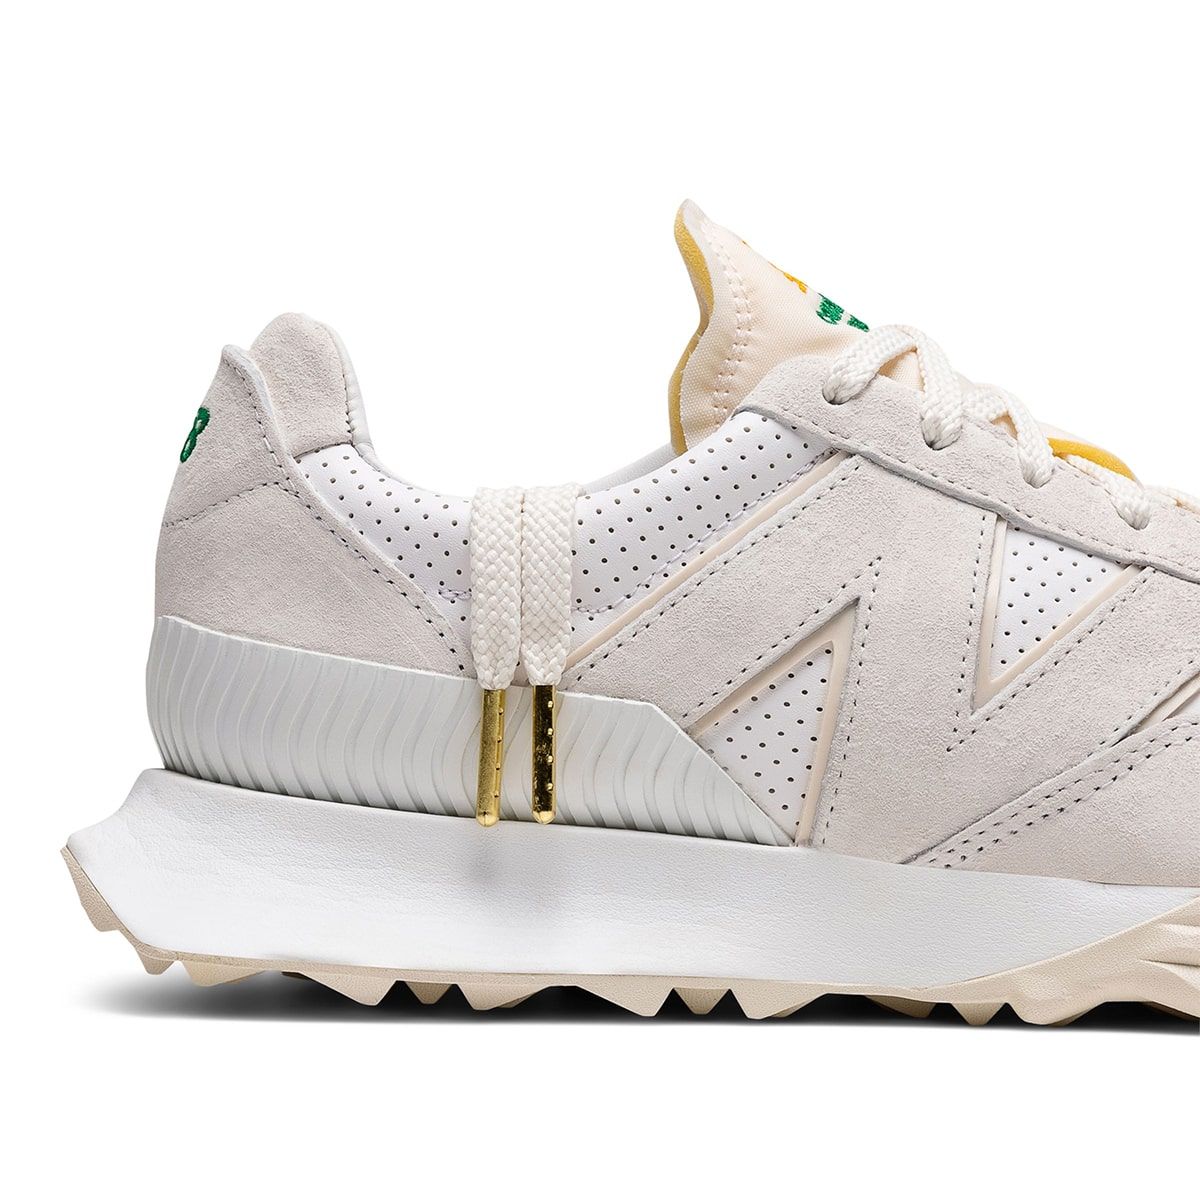 Casablanca to Release Third New Balance XC-72 in Cream | House of ...